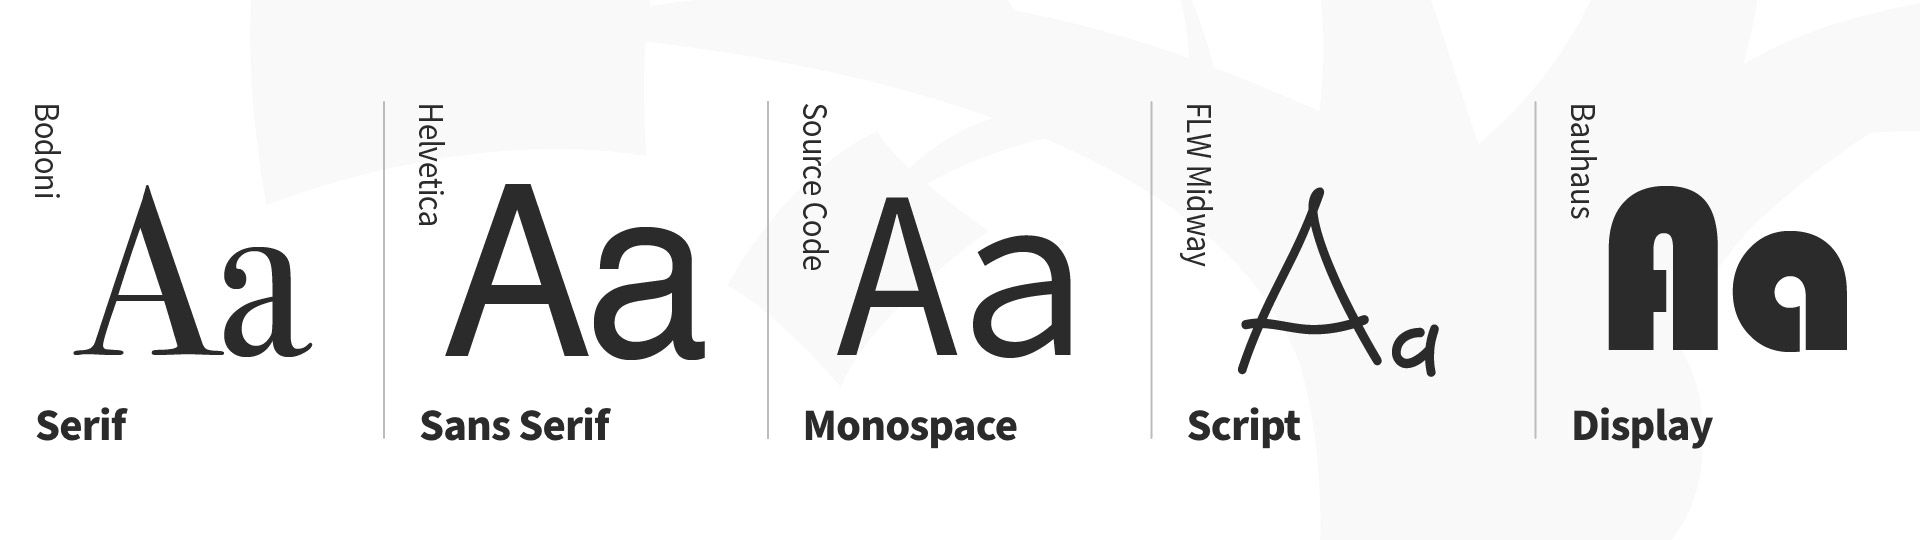 Type Classifications